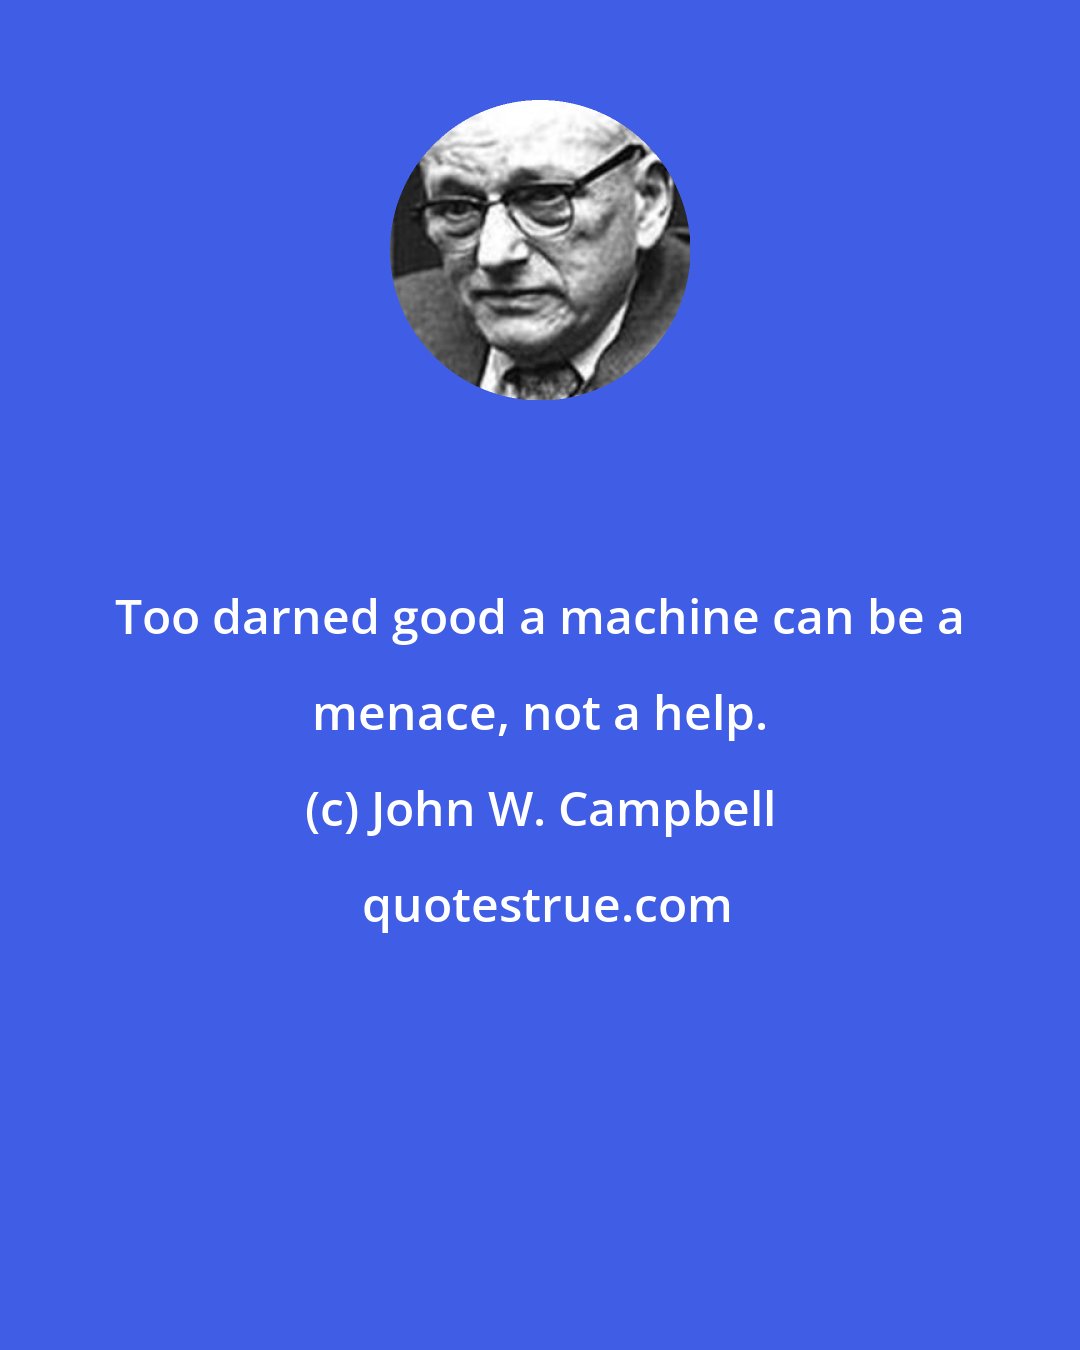 John W. Campbell: Too darned good a machine can be a menace, not a help.